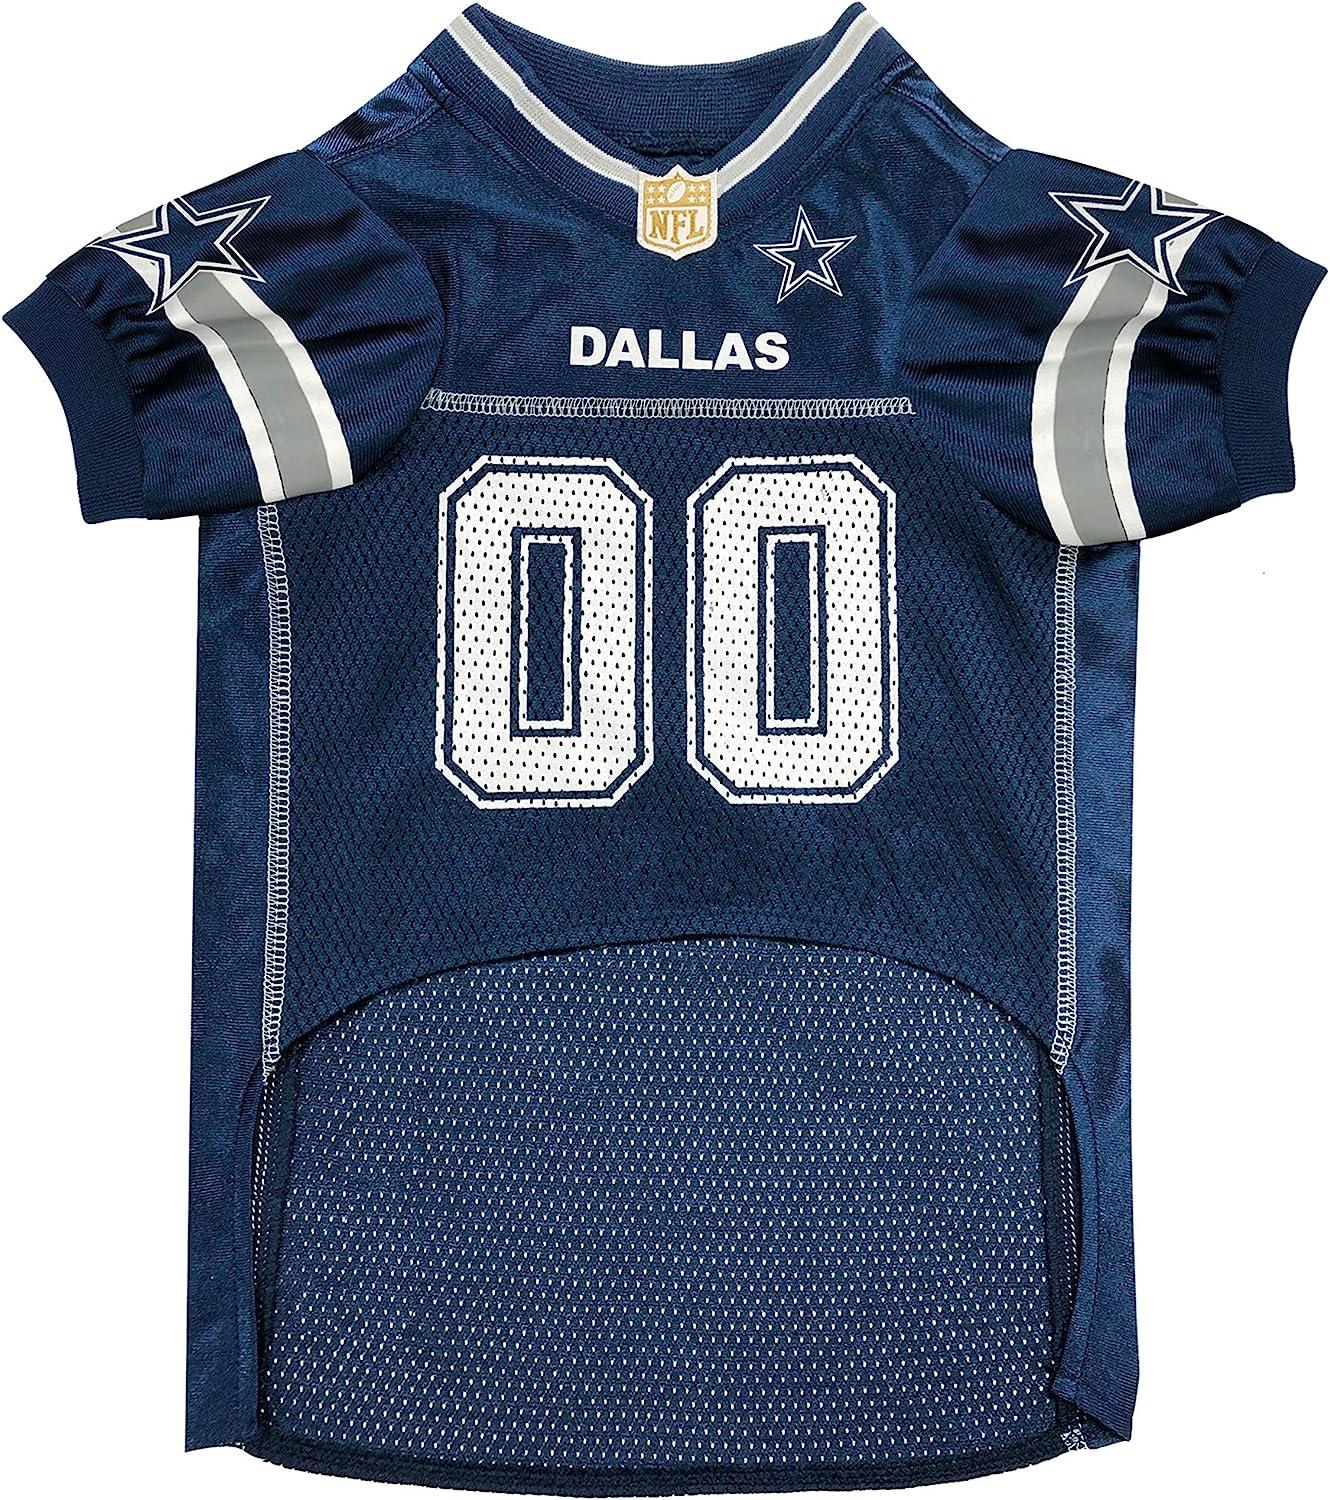  NFL Dallas Cowboys Dog Jersey, Size: Small. Best Football  Jersey Costume for Dogs & Cats. Licensed Jersey Shirt. : Sports & Outdoors